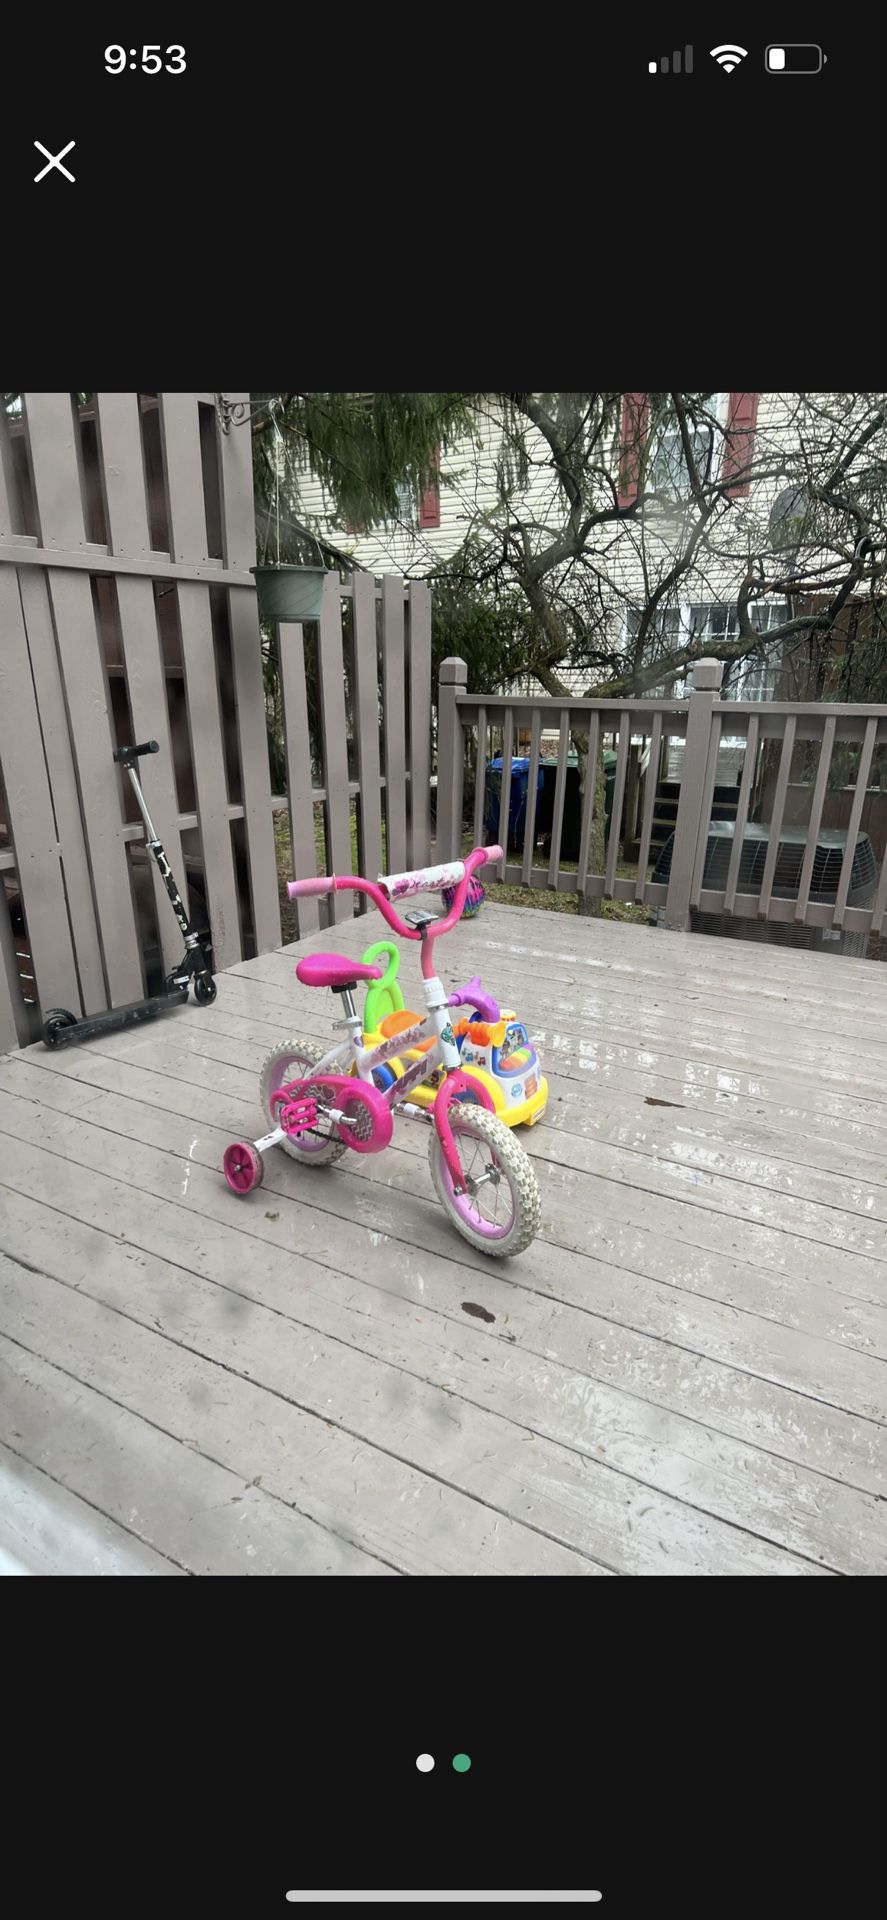 This Bike is for sale, And It Is For 4-5 Year Old Kids